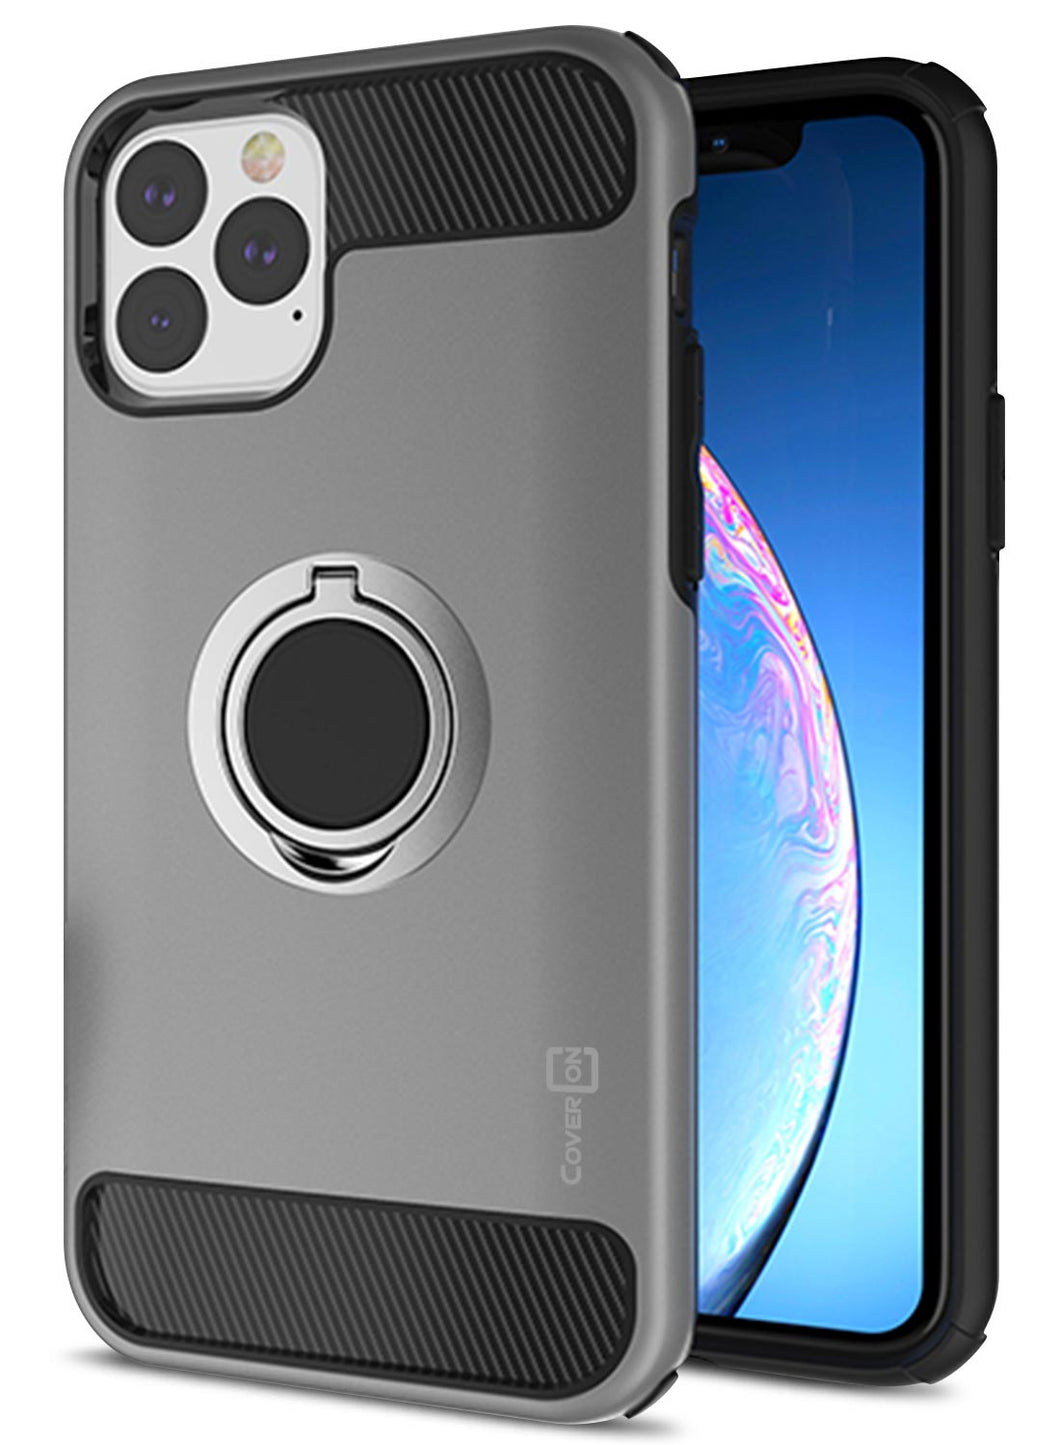 iPhone 11 Pro Case with Ring - Magnetic Mount Compatible - RingCase Series